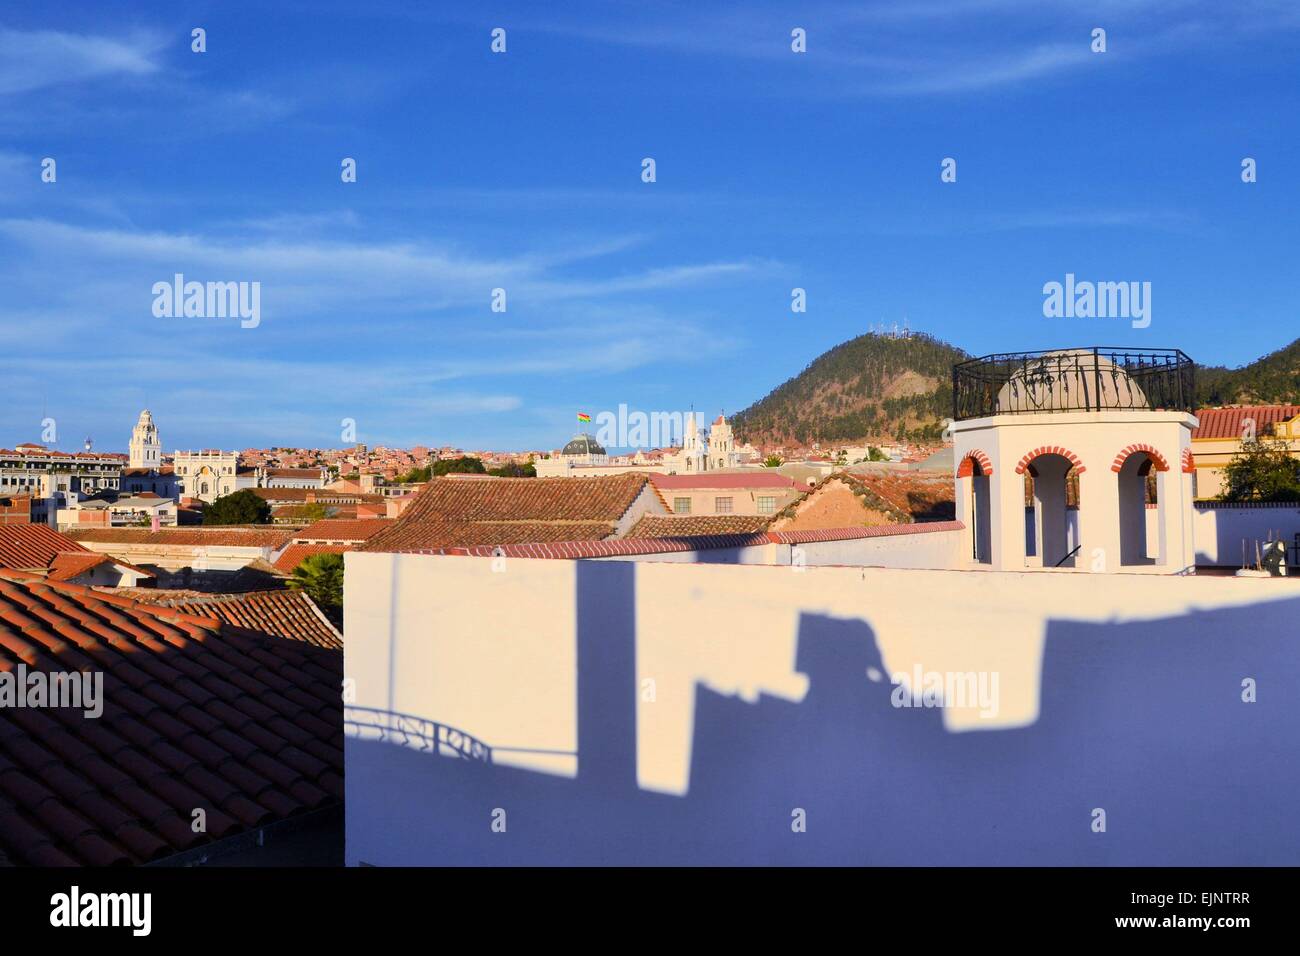 Sucre cityscape with Roofs, constitutional capital of Bolivia Stock Photo